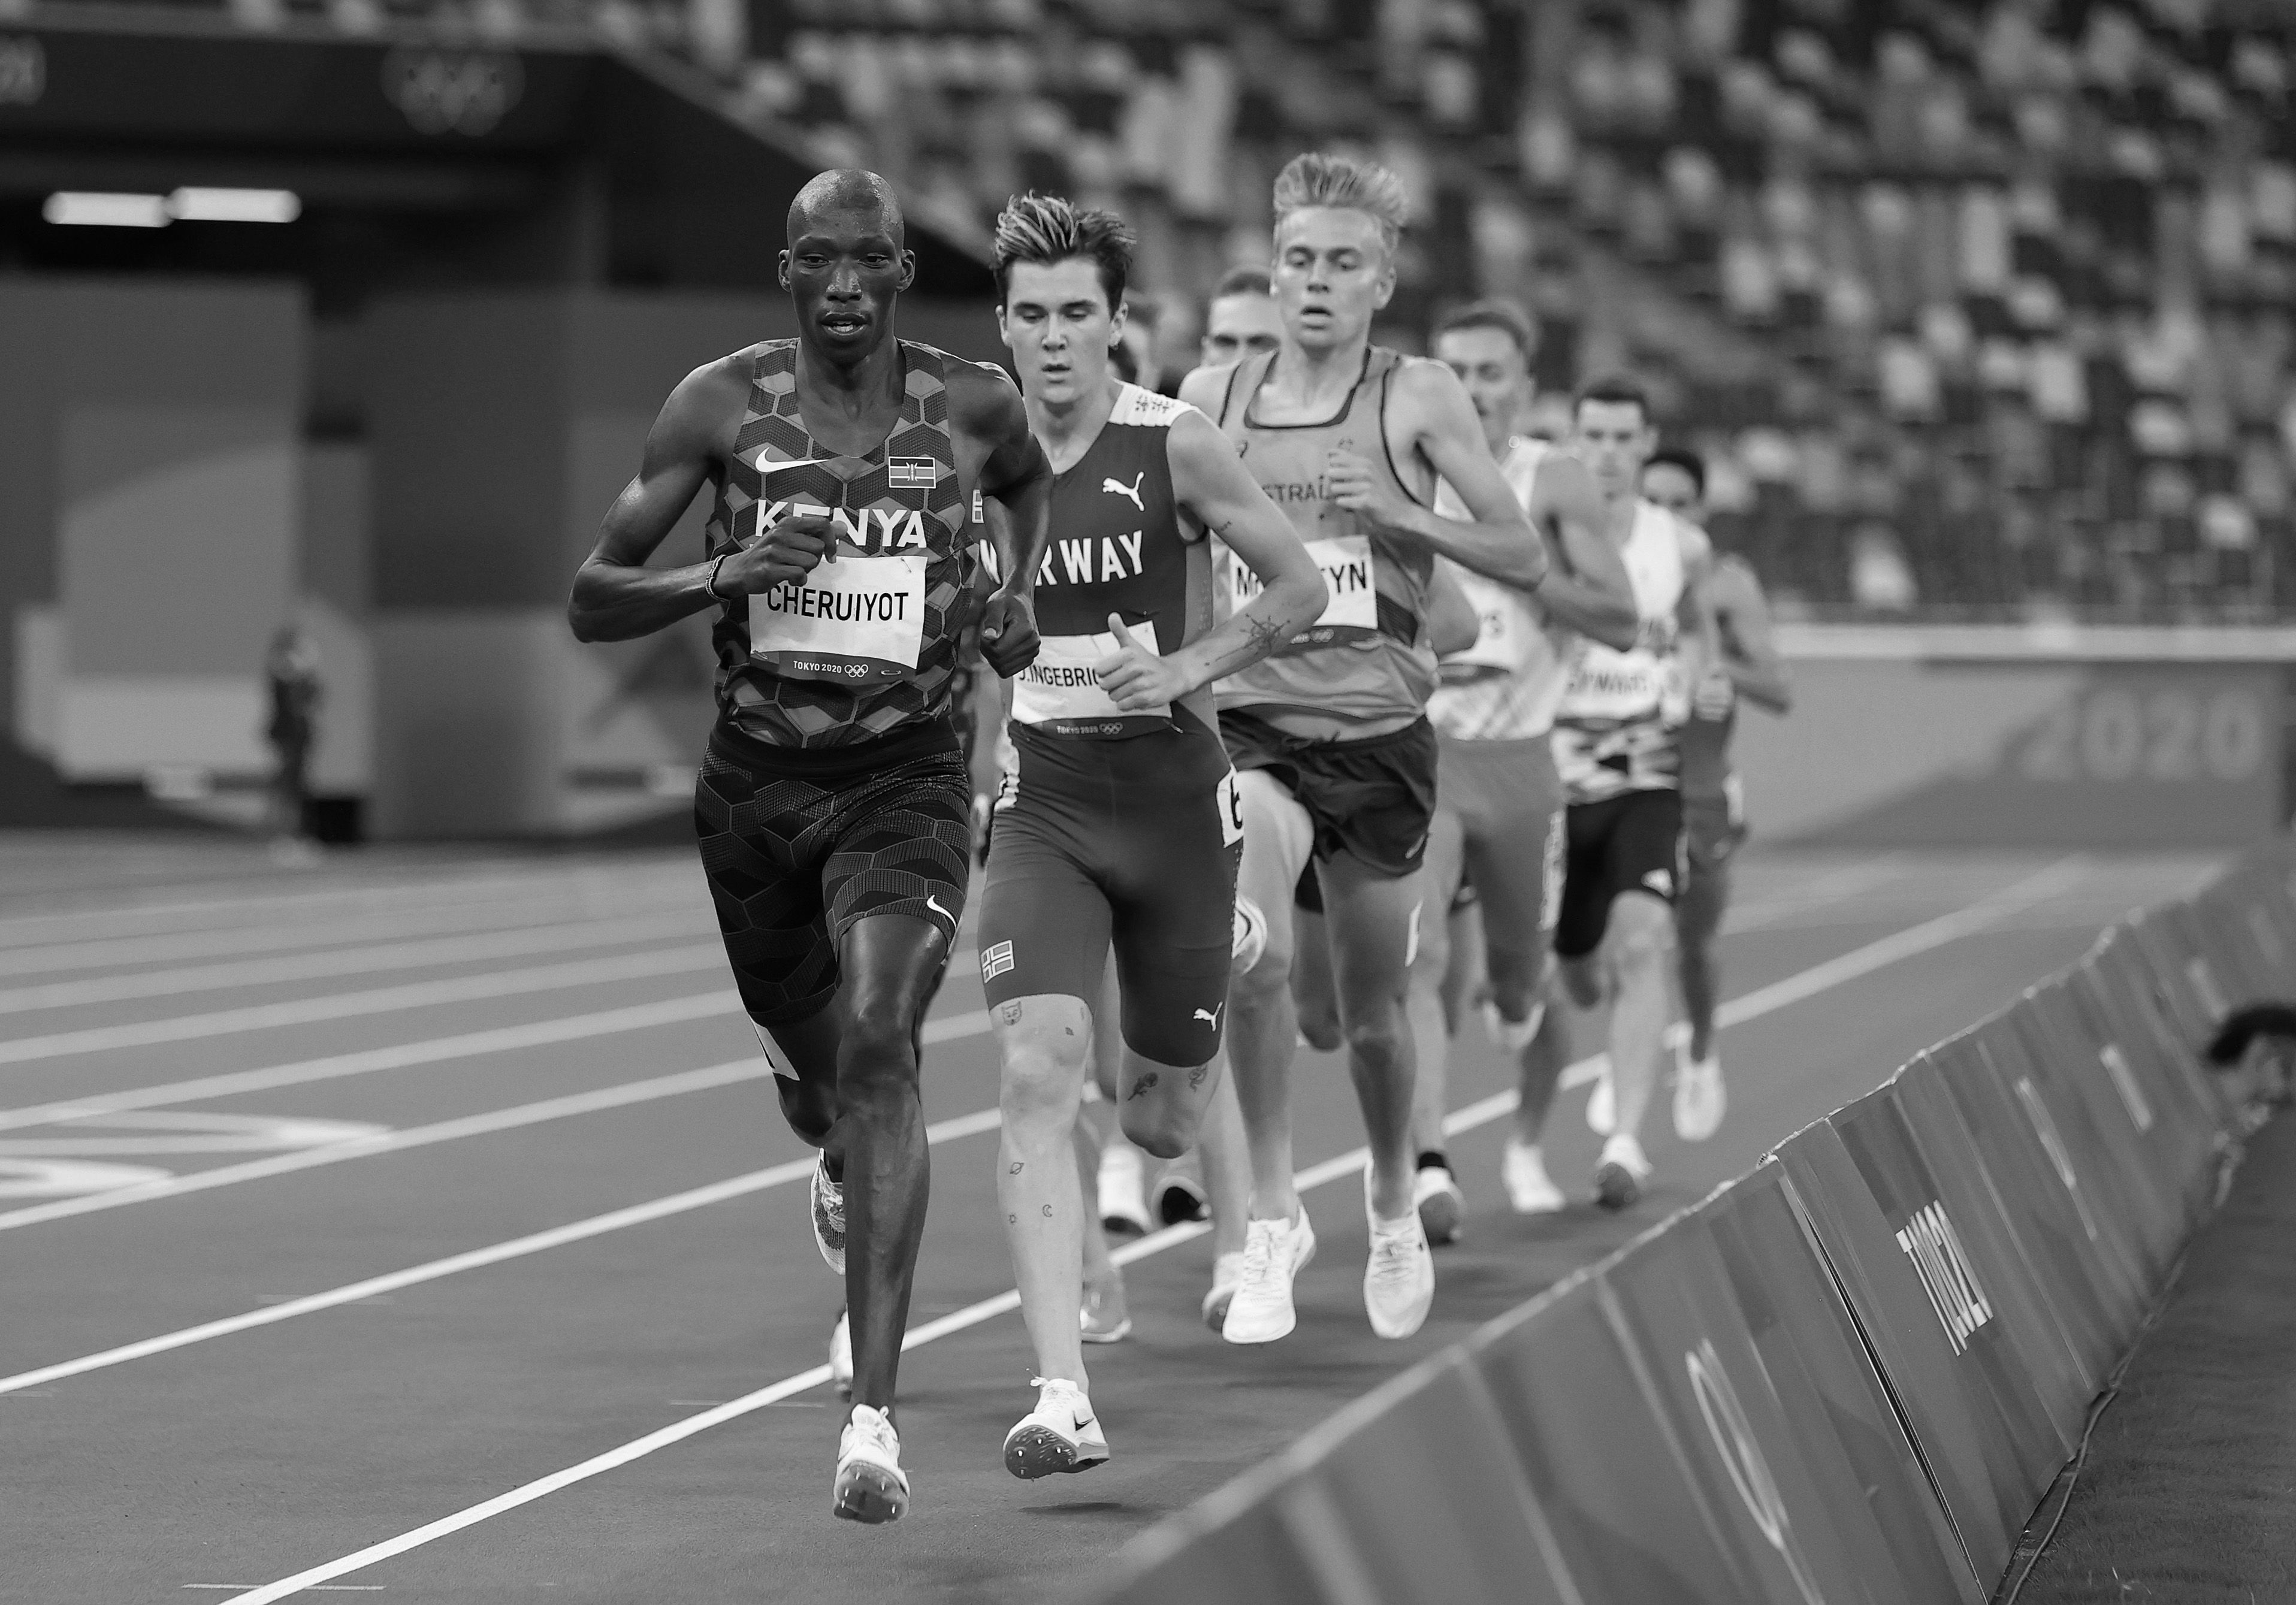 Timothy Cheruiyot leads the 1500m field at the Tokyo Olympics